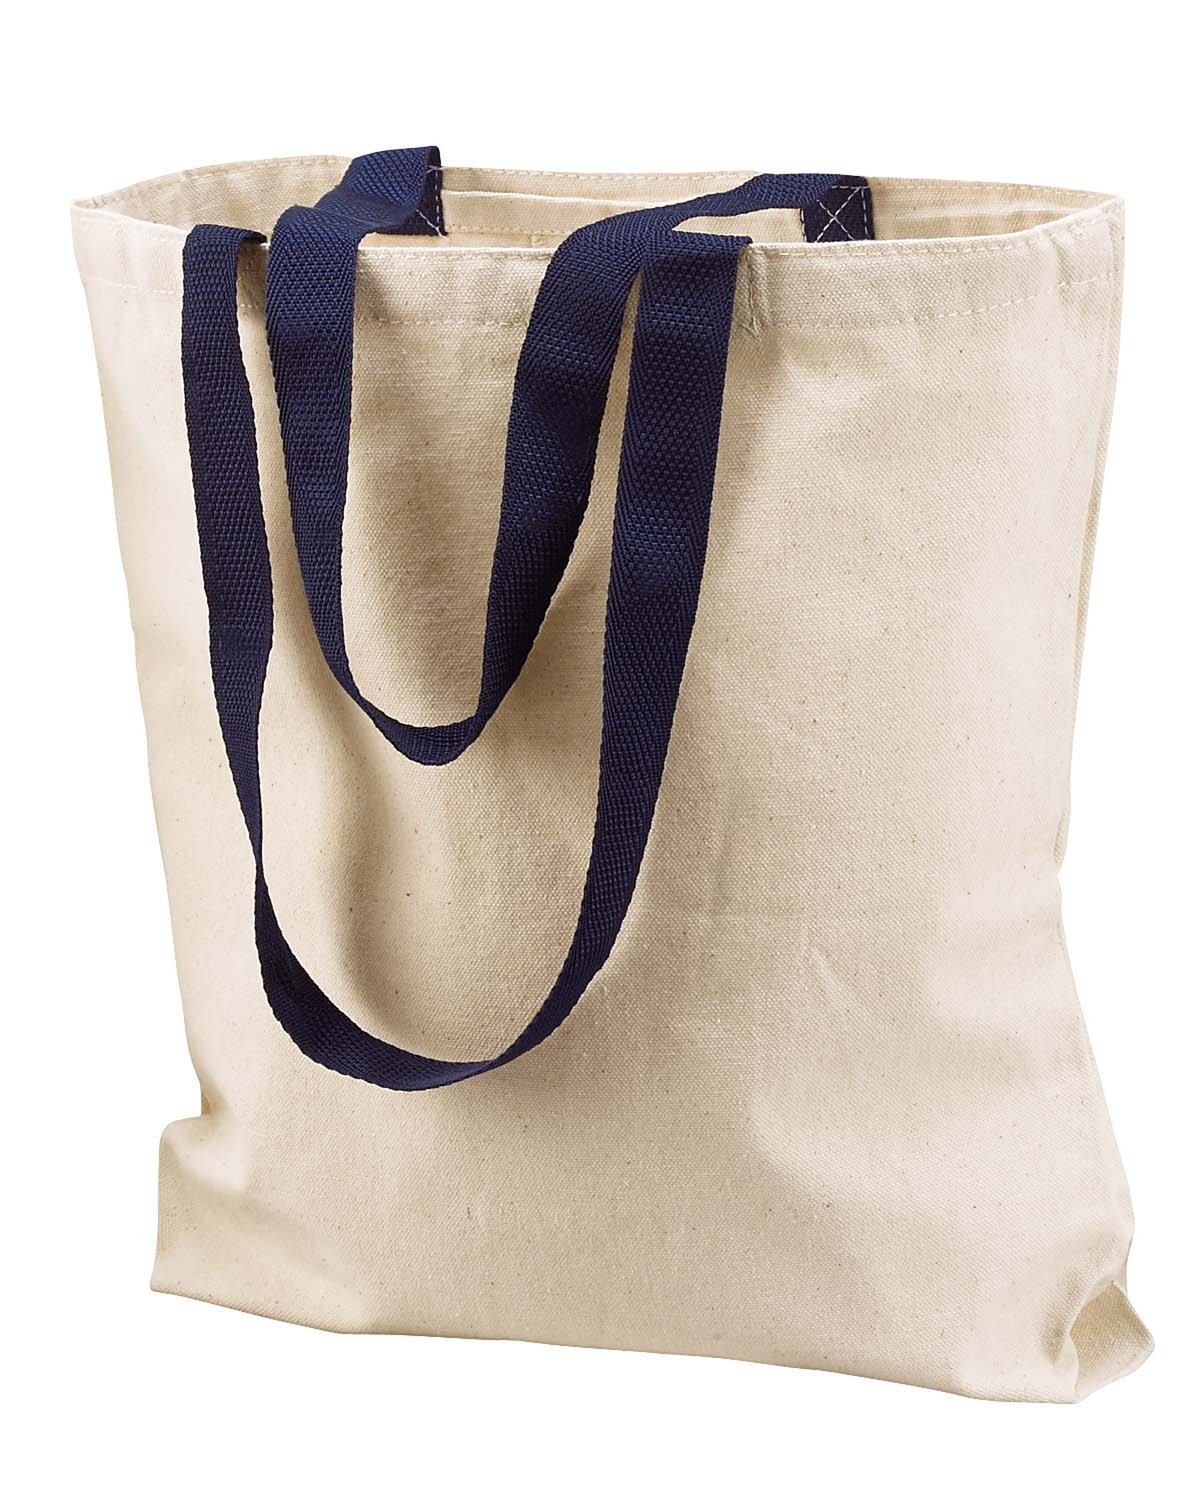 Liberty Bags Marianne Cotton Canvas Tote | alphabroder